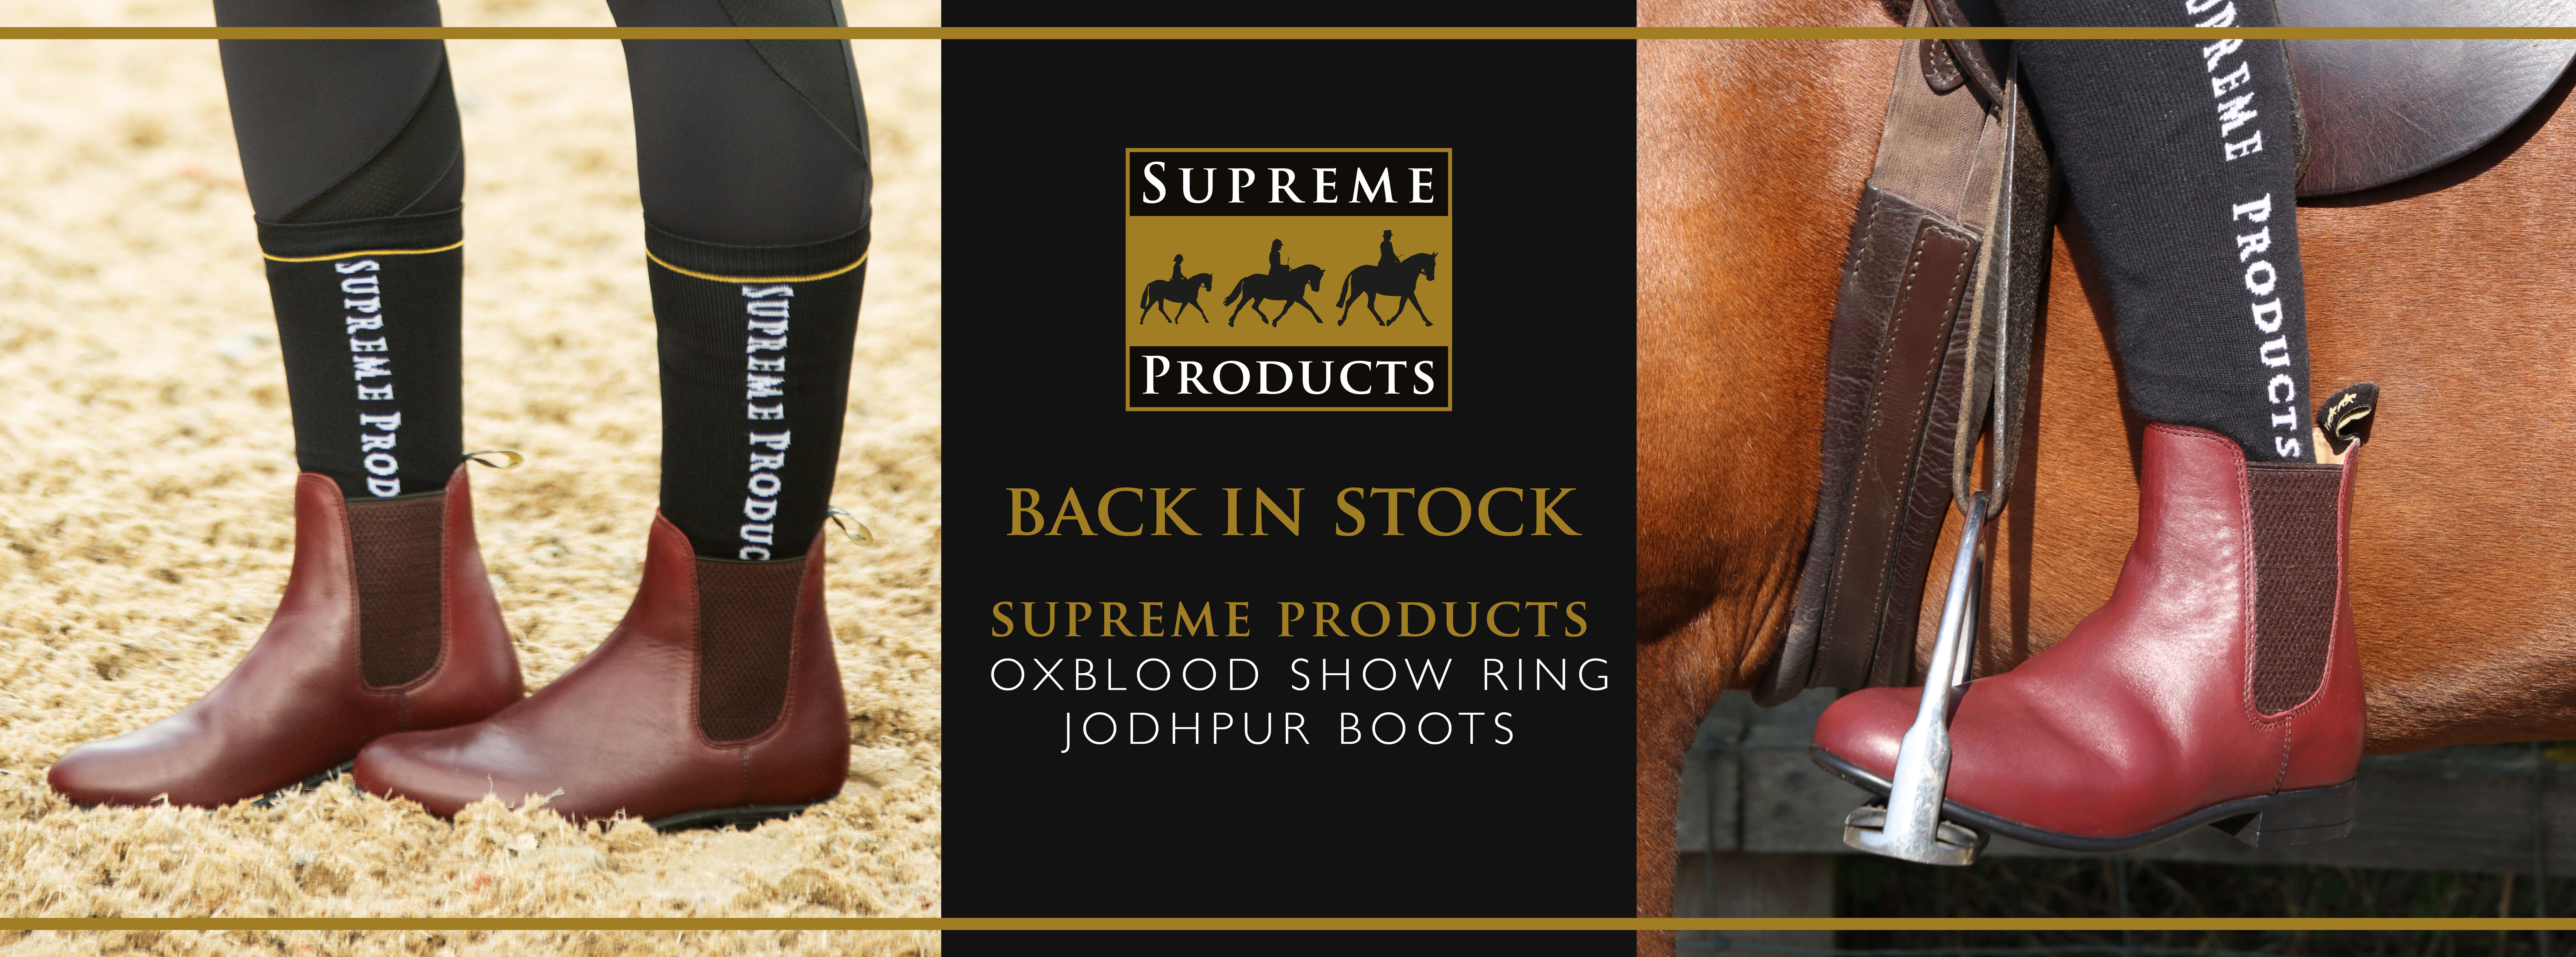 Supreme Products - Oxblood Show Ring Jodhpur Boots BIS